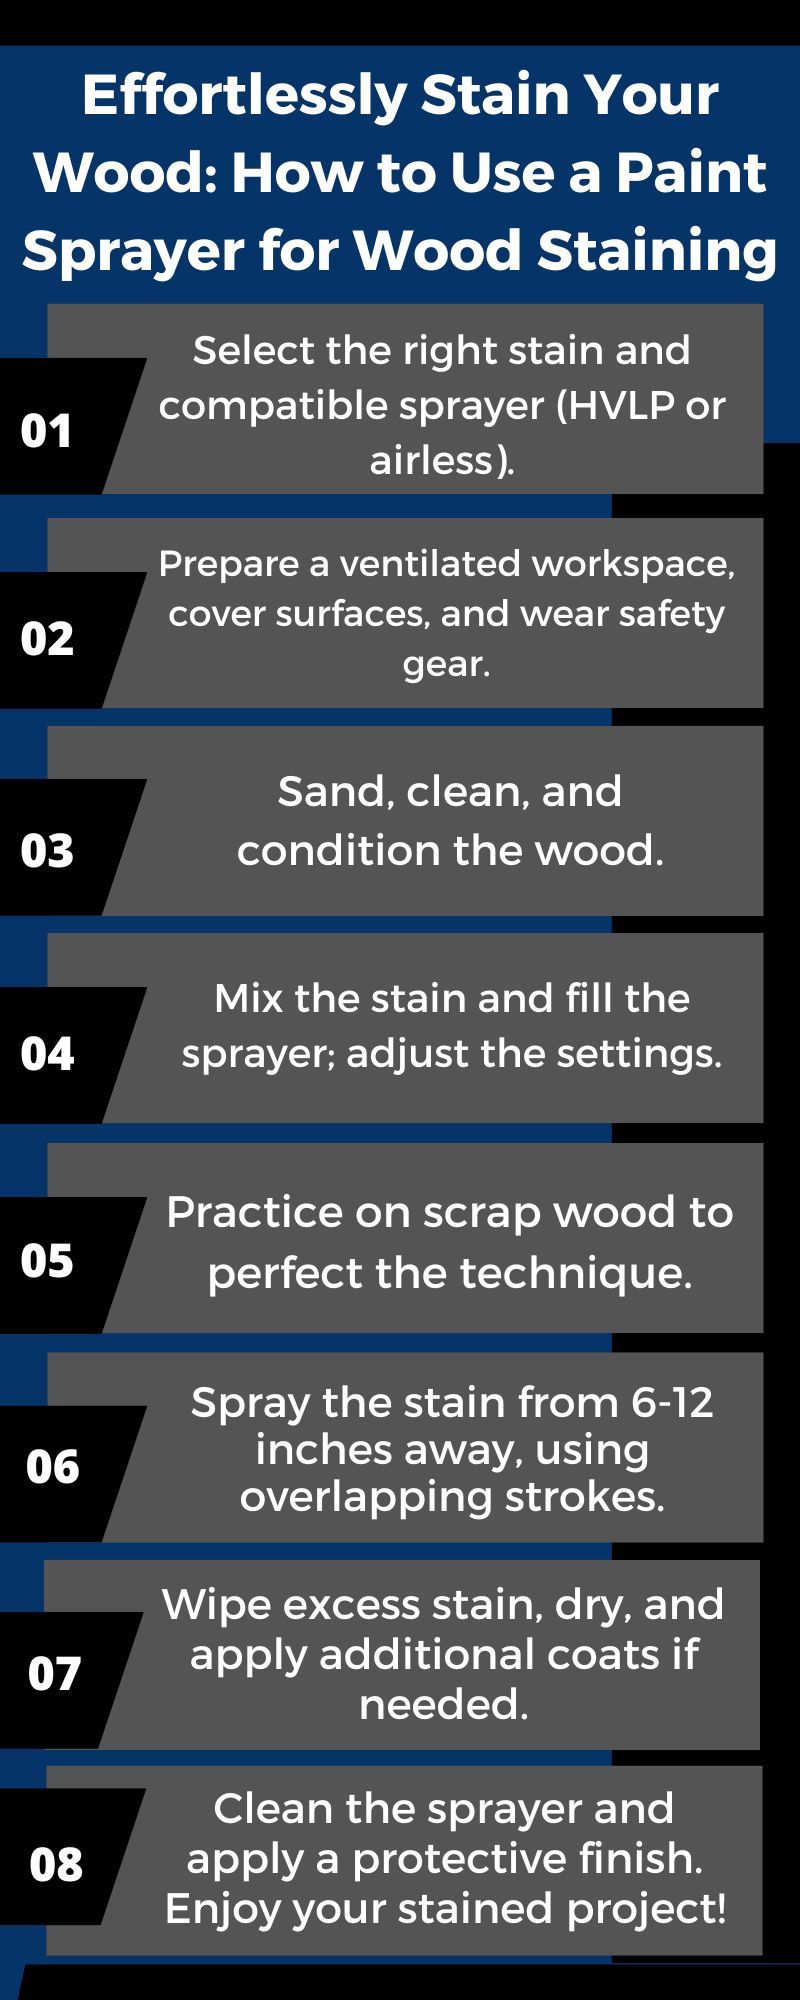 Effortlessly Stain Your Wood: How to Use a Paint Sprayer for Wood Staining